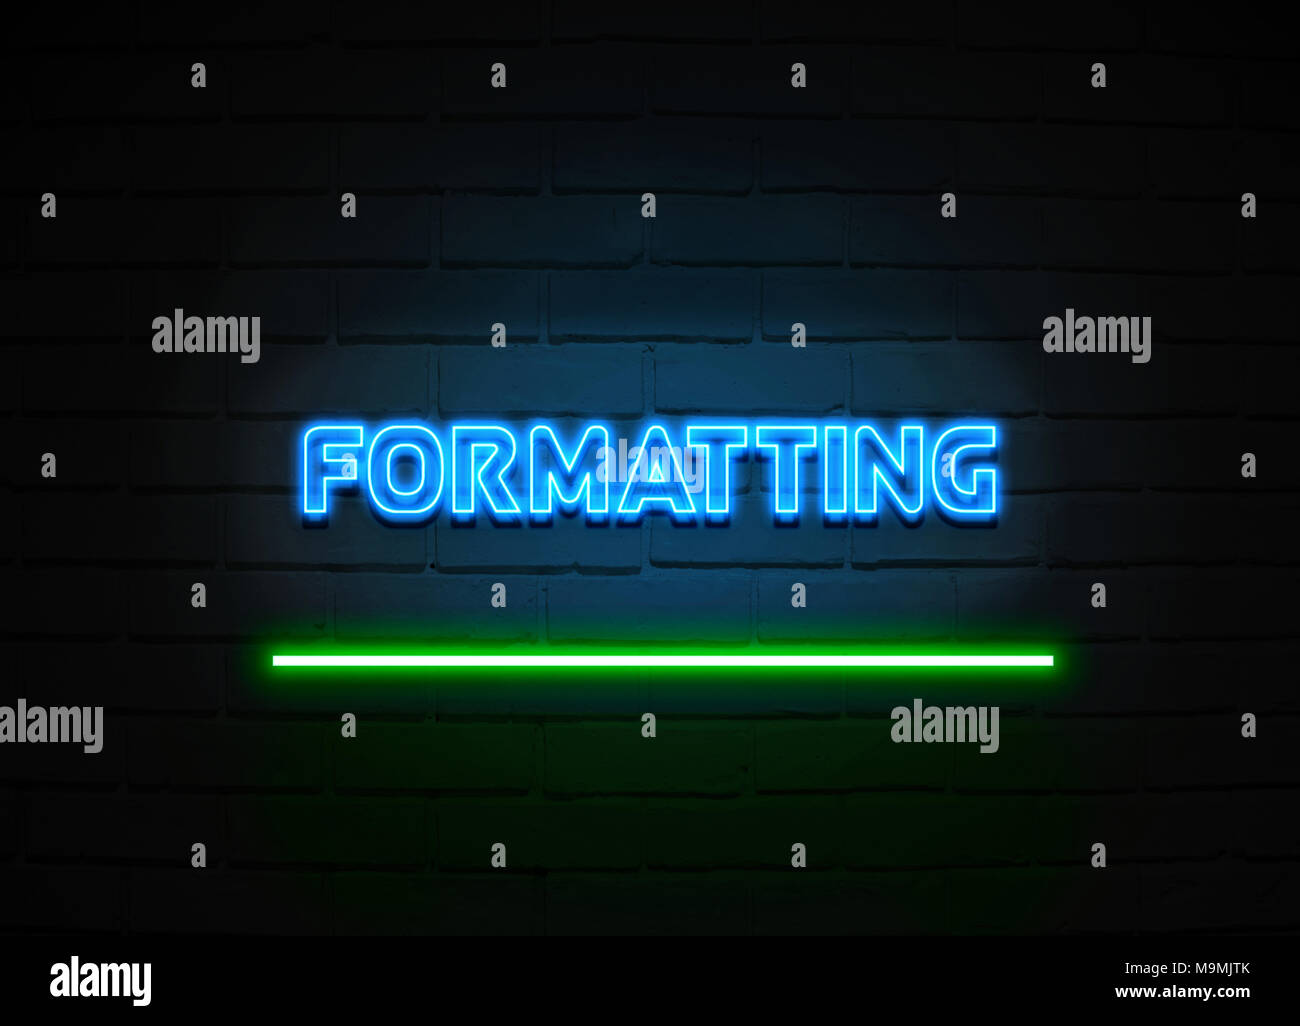 Formatting neon sign - Glowing Neon Sign on brickwall wall - 3D rendered royalty free stock illustration. Stock Photo